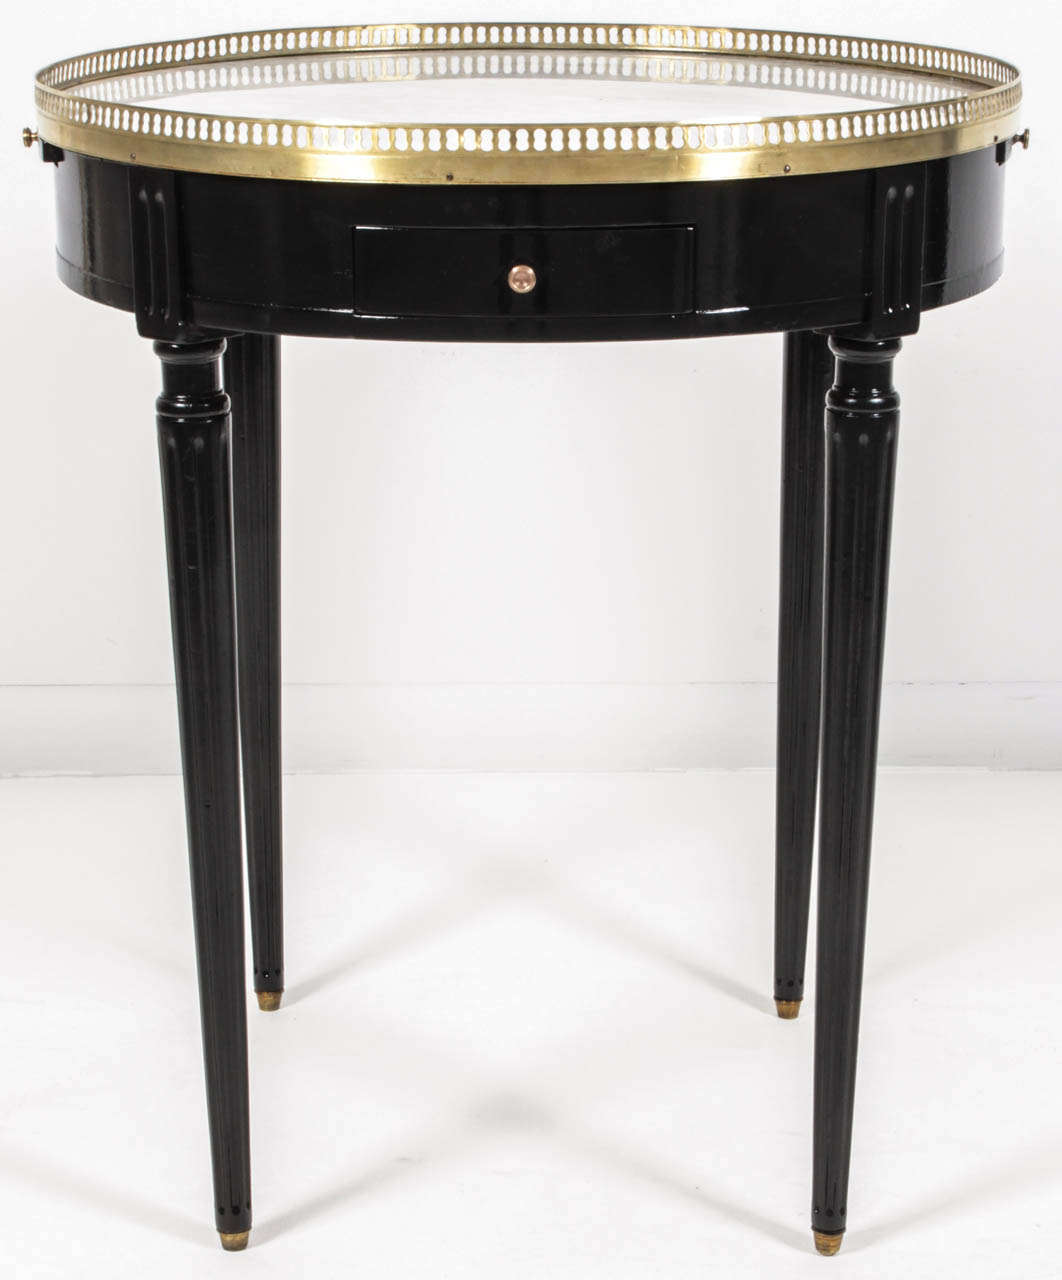 Round blank table with white marble top and brass gallery
Drawers on each side